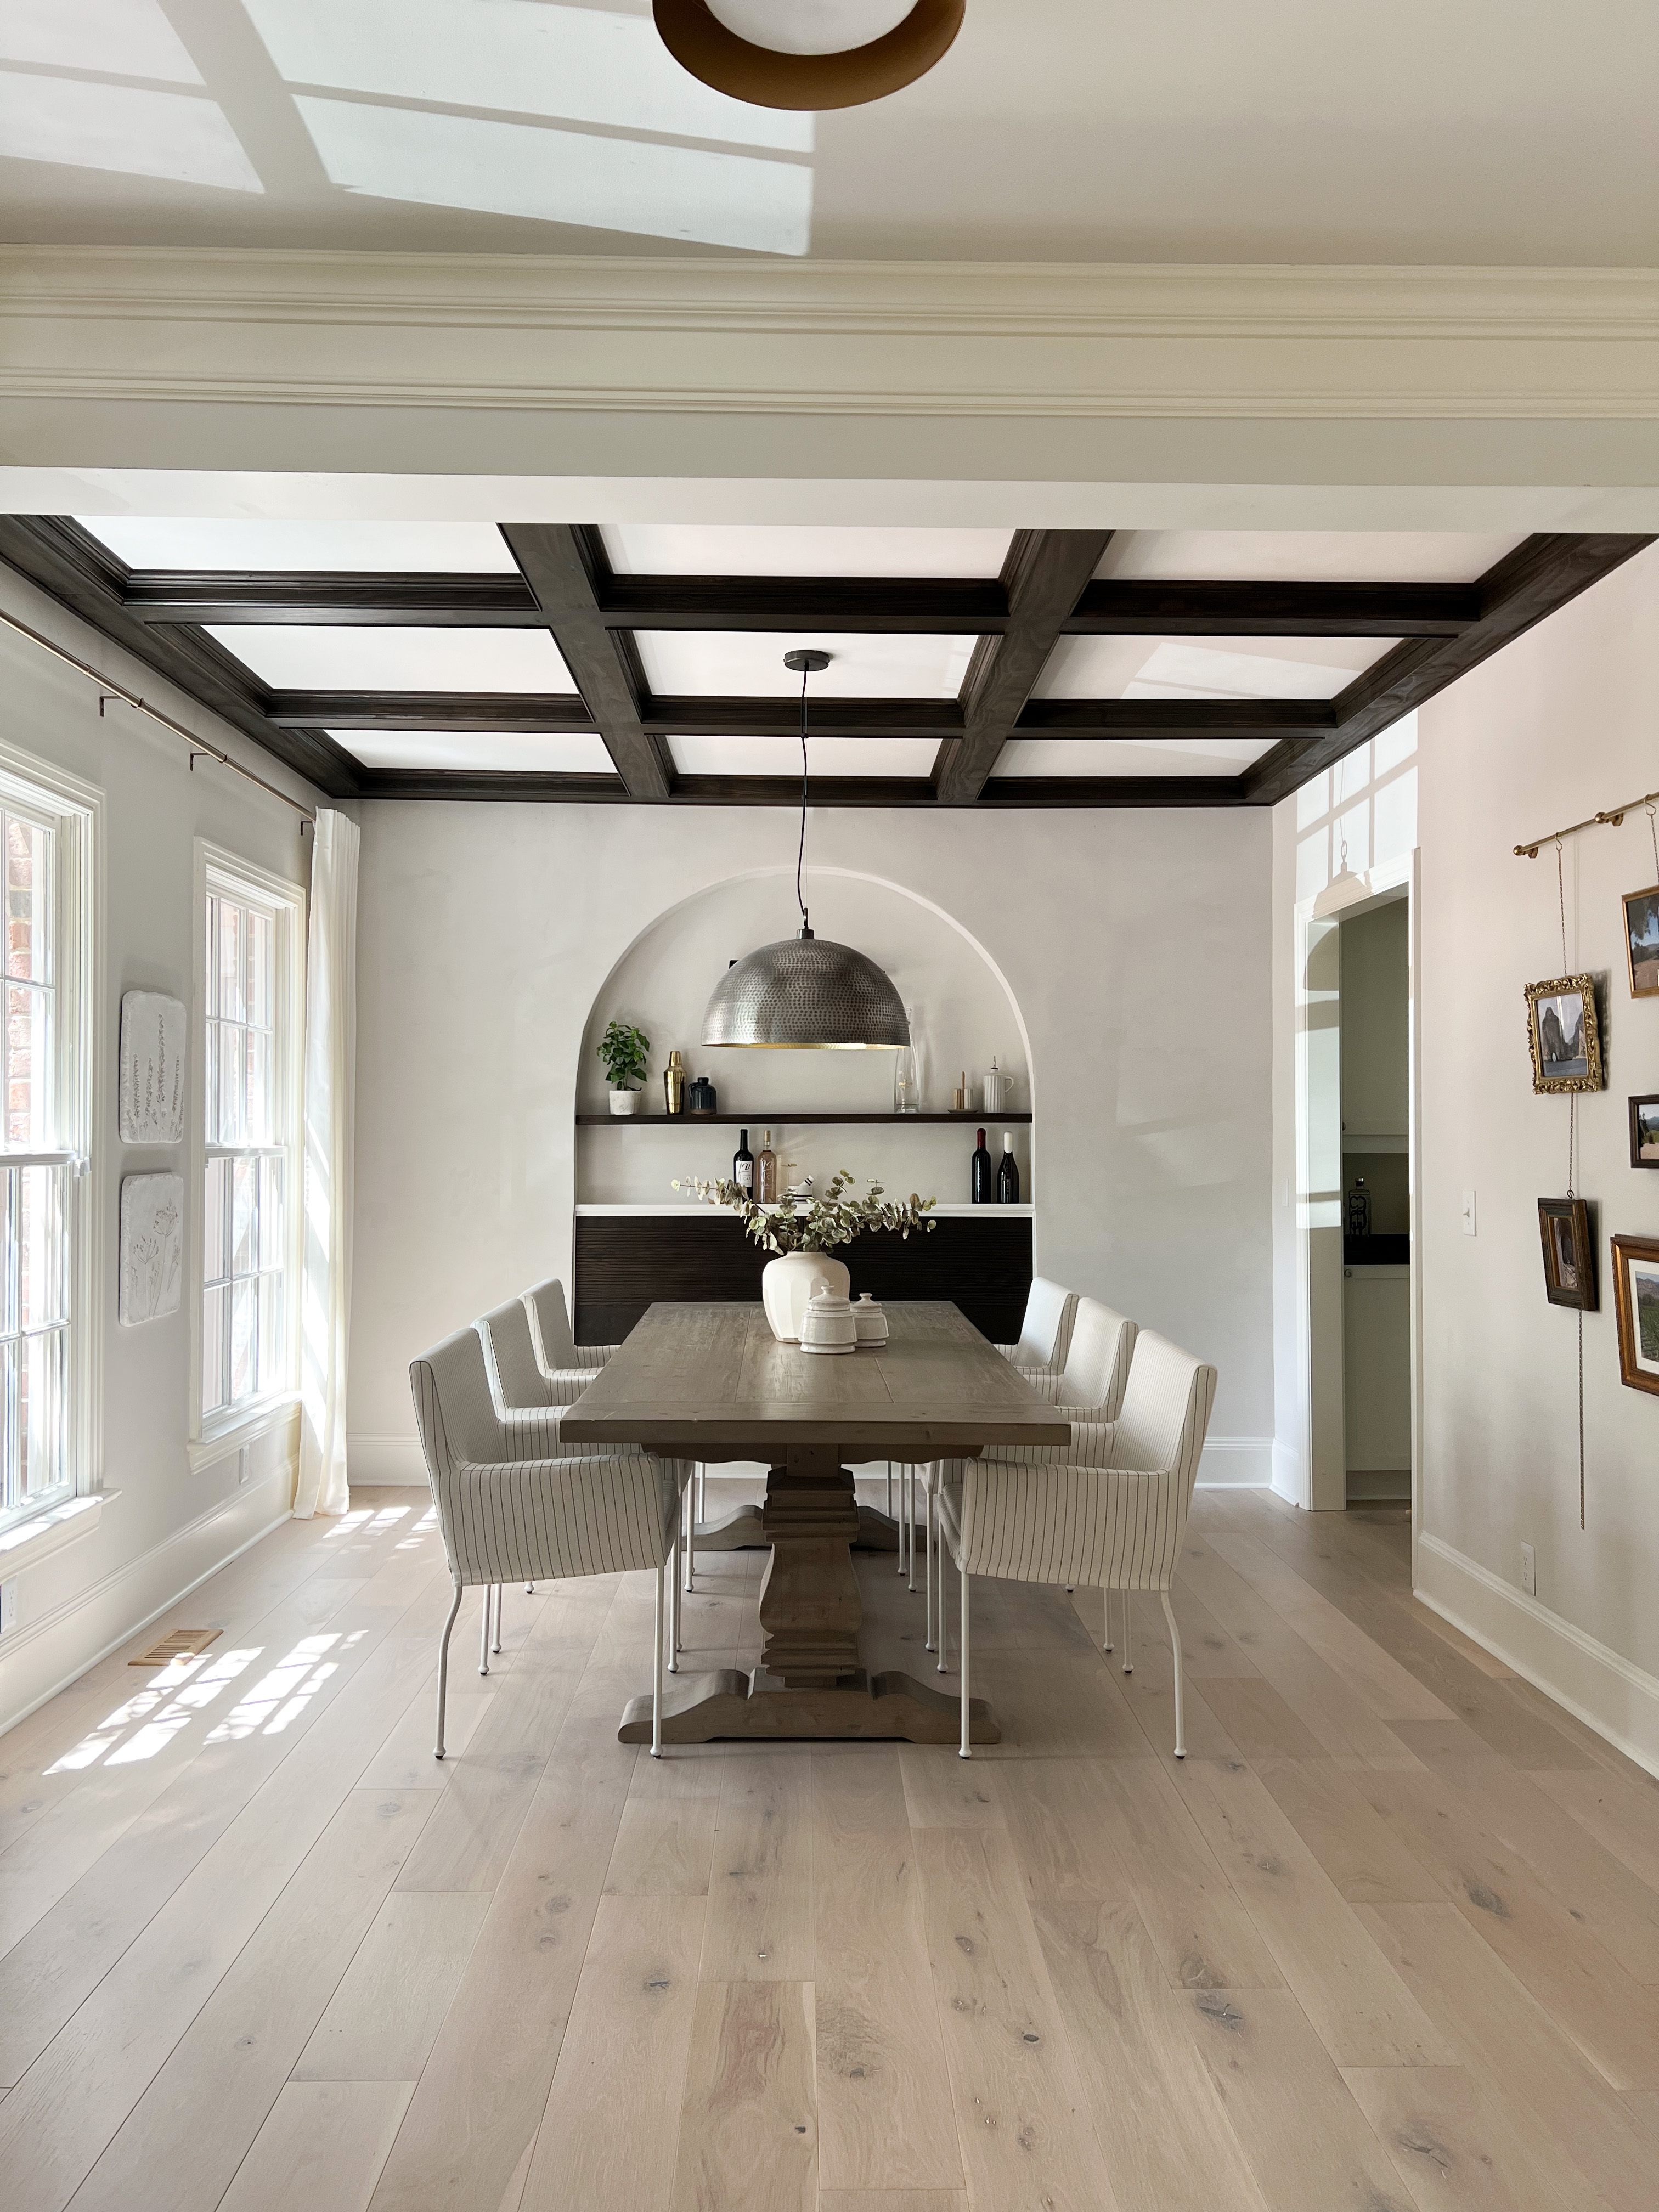 Image of a dining room with light oak floors, roman clay walls, and a dark wood diy coffered ceiling.